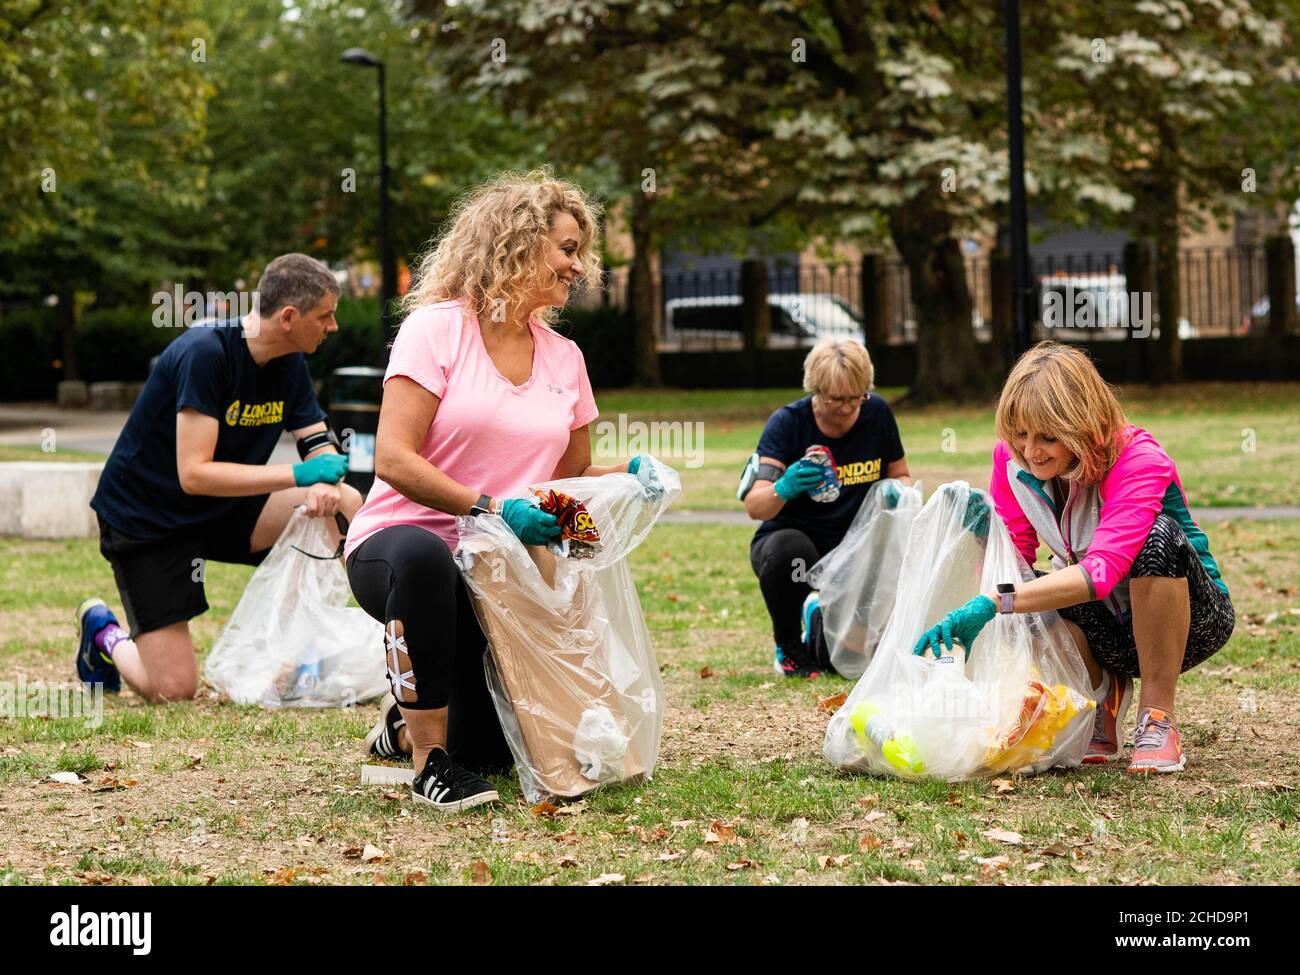 Nadia Sawalha and Kaye Adams (right) go 'Plogging', which is a Scandinavian fitness trend where people pick up plastic whilst out walking or running, with Fitbit and London City Runners in support of WasteAid, in central London. Stock Photo